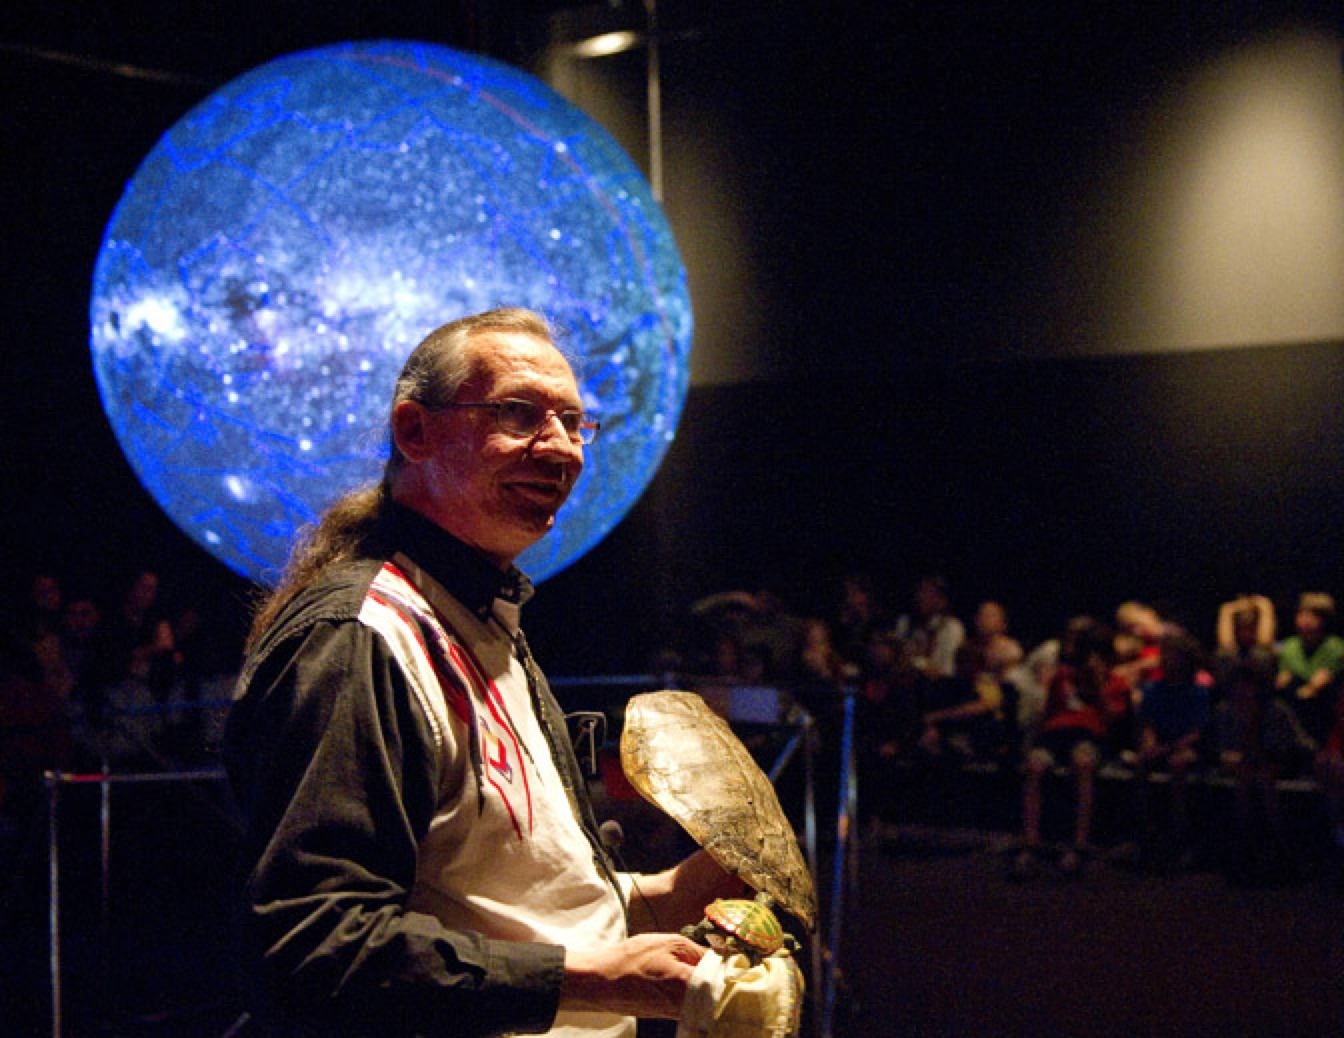 Plans tomorrow? Join Upstream partner Science Museum of Minnesota for their "Coffee with a Curator - We Come From the Stars" event!Join the event for a conversation about Lakota astronomy, science and lore with Archaeoastronomer/Ethnoastronomer Jim Rock. Using images, stories and conversation, Rock -who teaches a course in ethno- and archaeoastronomy at the University of Minnesota, Duluth- will reveal new meanings in the night sky. #MNUpstream #Upstream #goupstream #instarock #stars #university #museum #ScienceMuseumofMinnesota  https://loom.ly/-wRZc6s — from Instagram